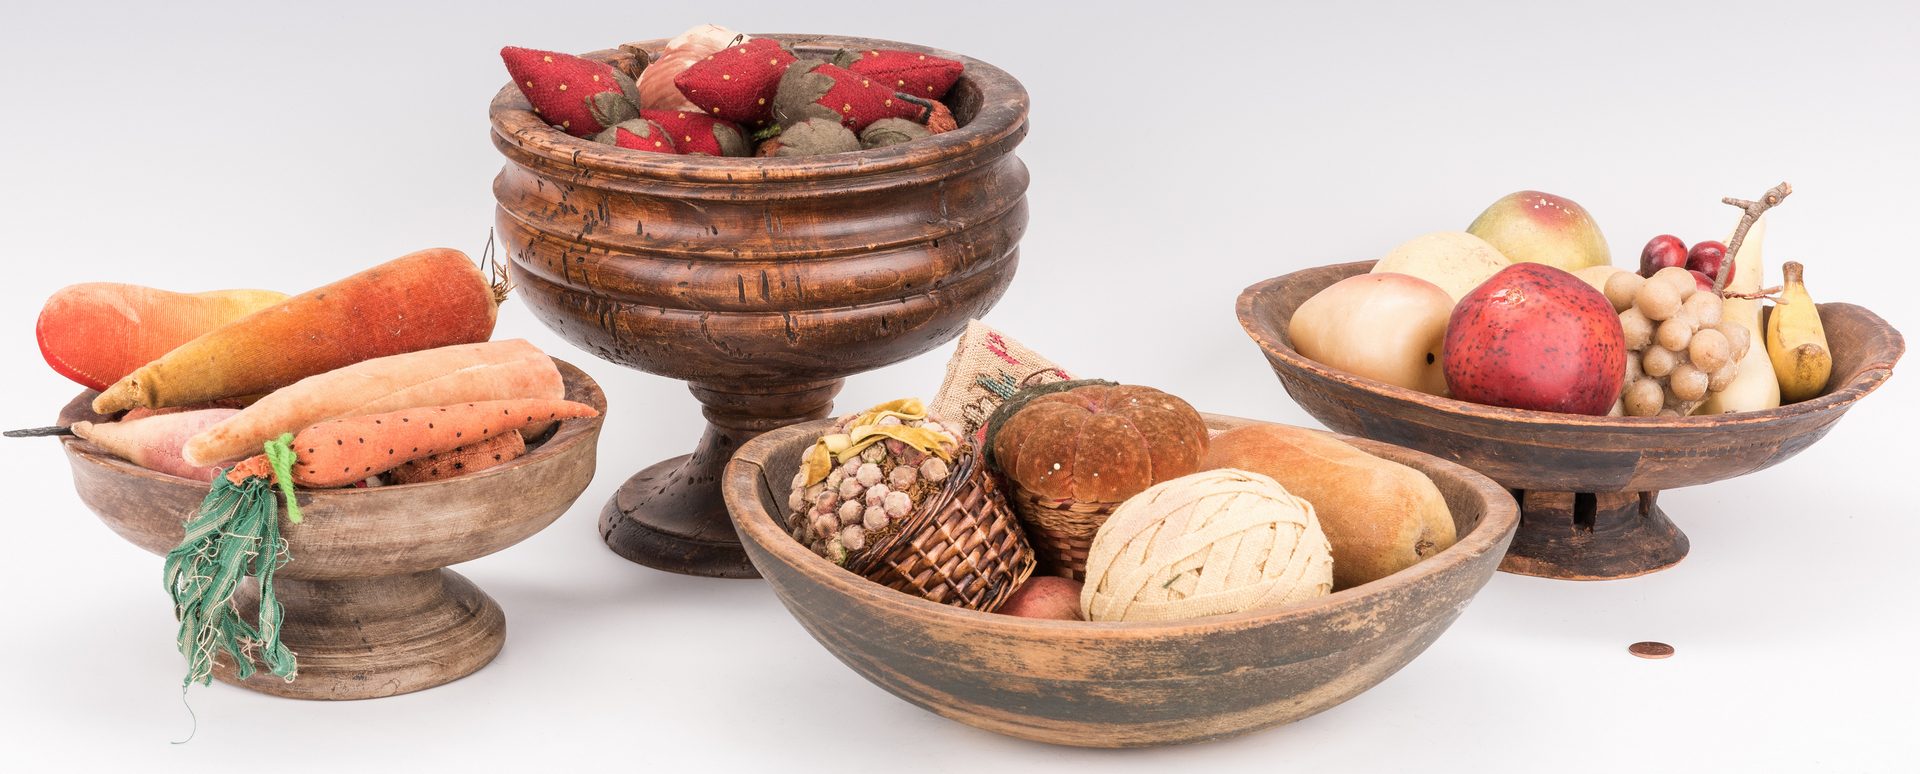 Lot 130: 4 19th Cent. American Treenware Items w/ Fruit